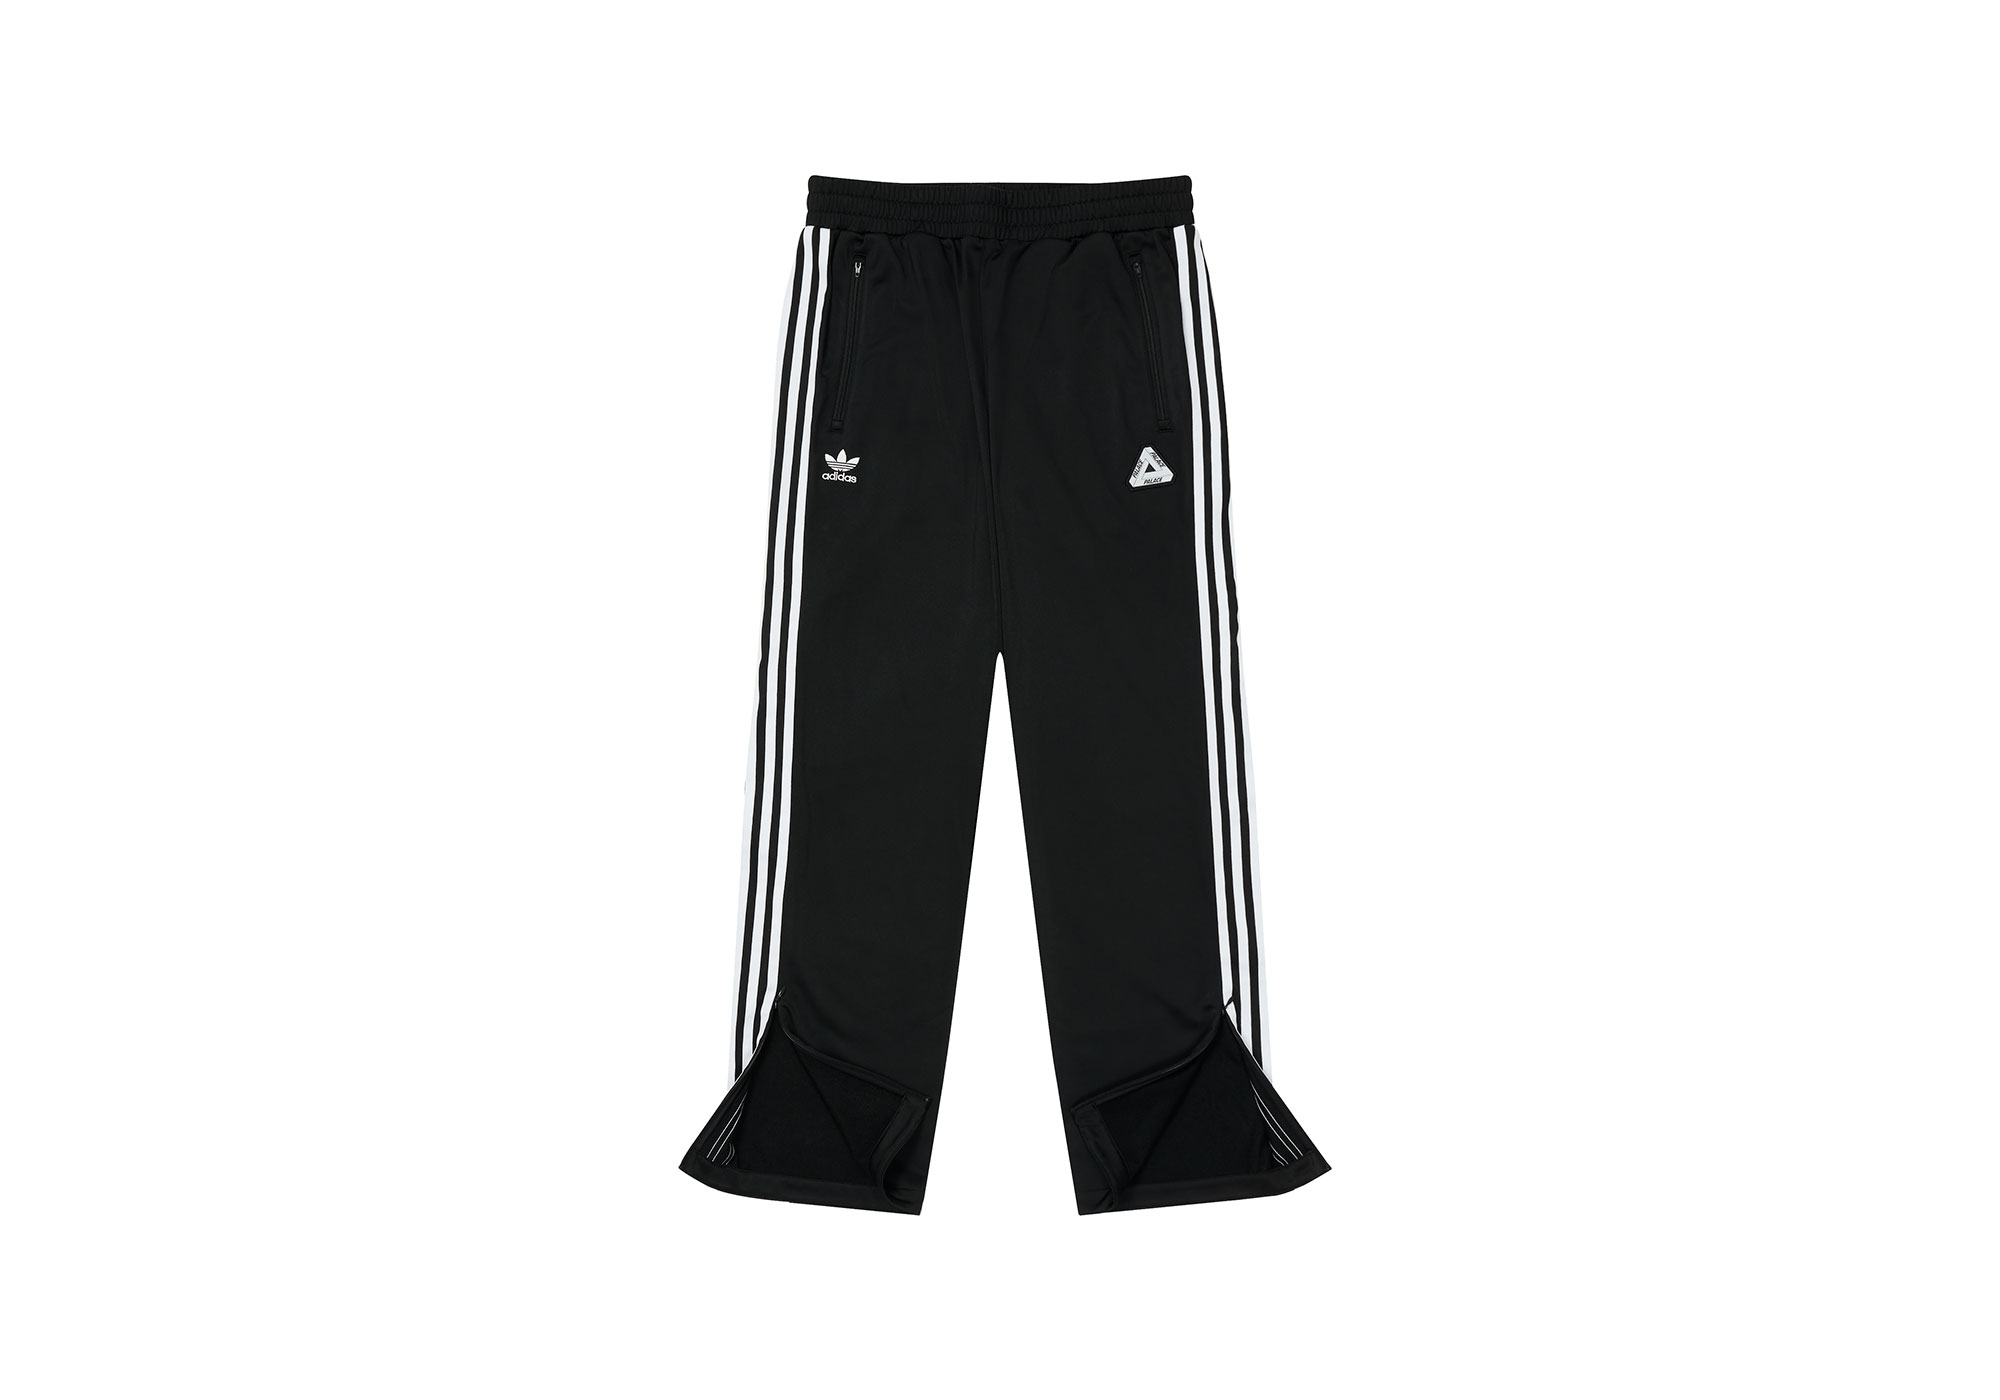 ADIDAS TRACK PANTS BLACK-LIME on sale only $39.99